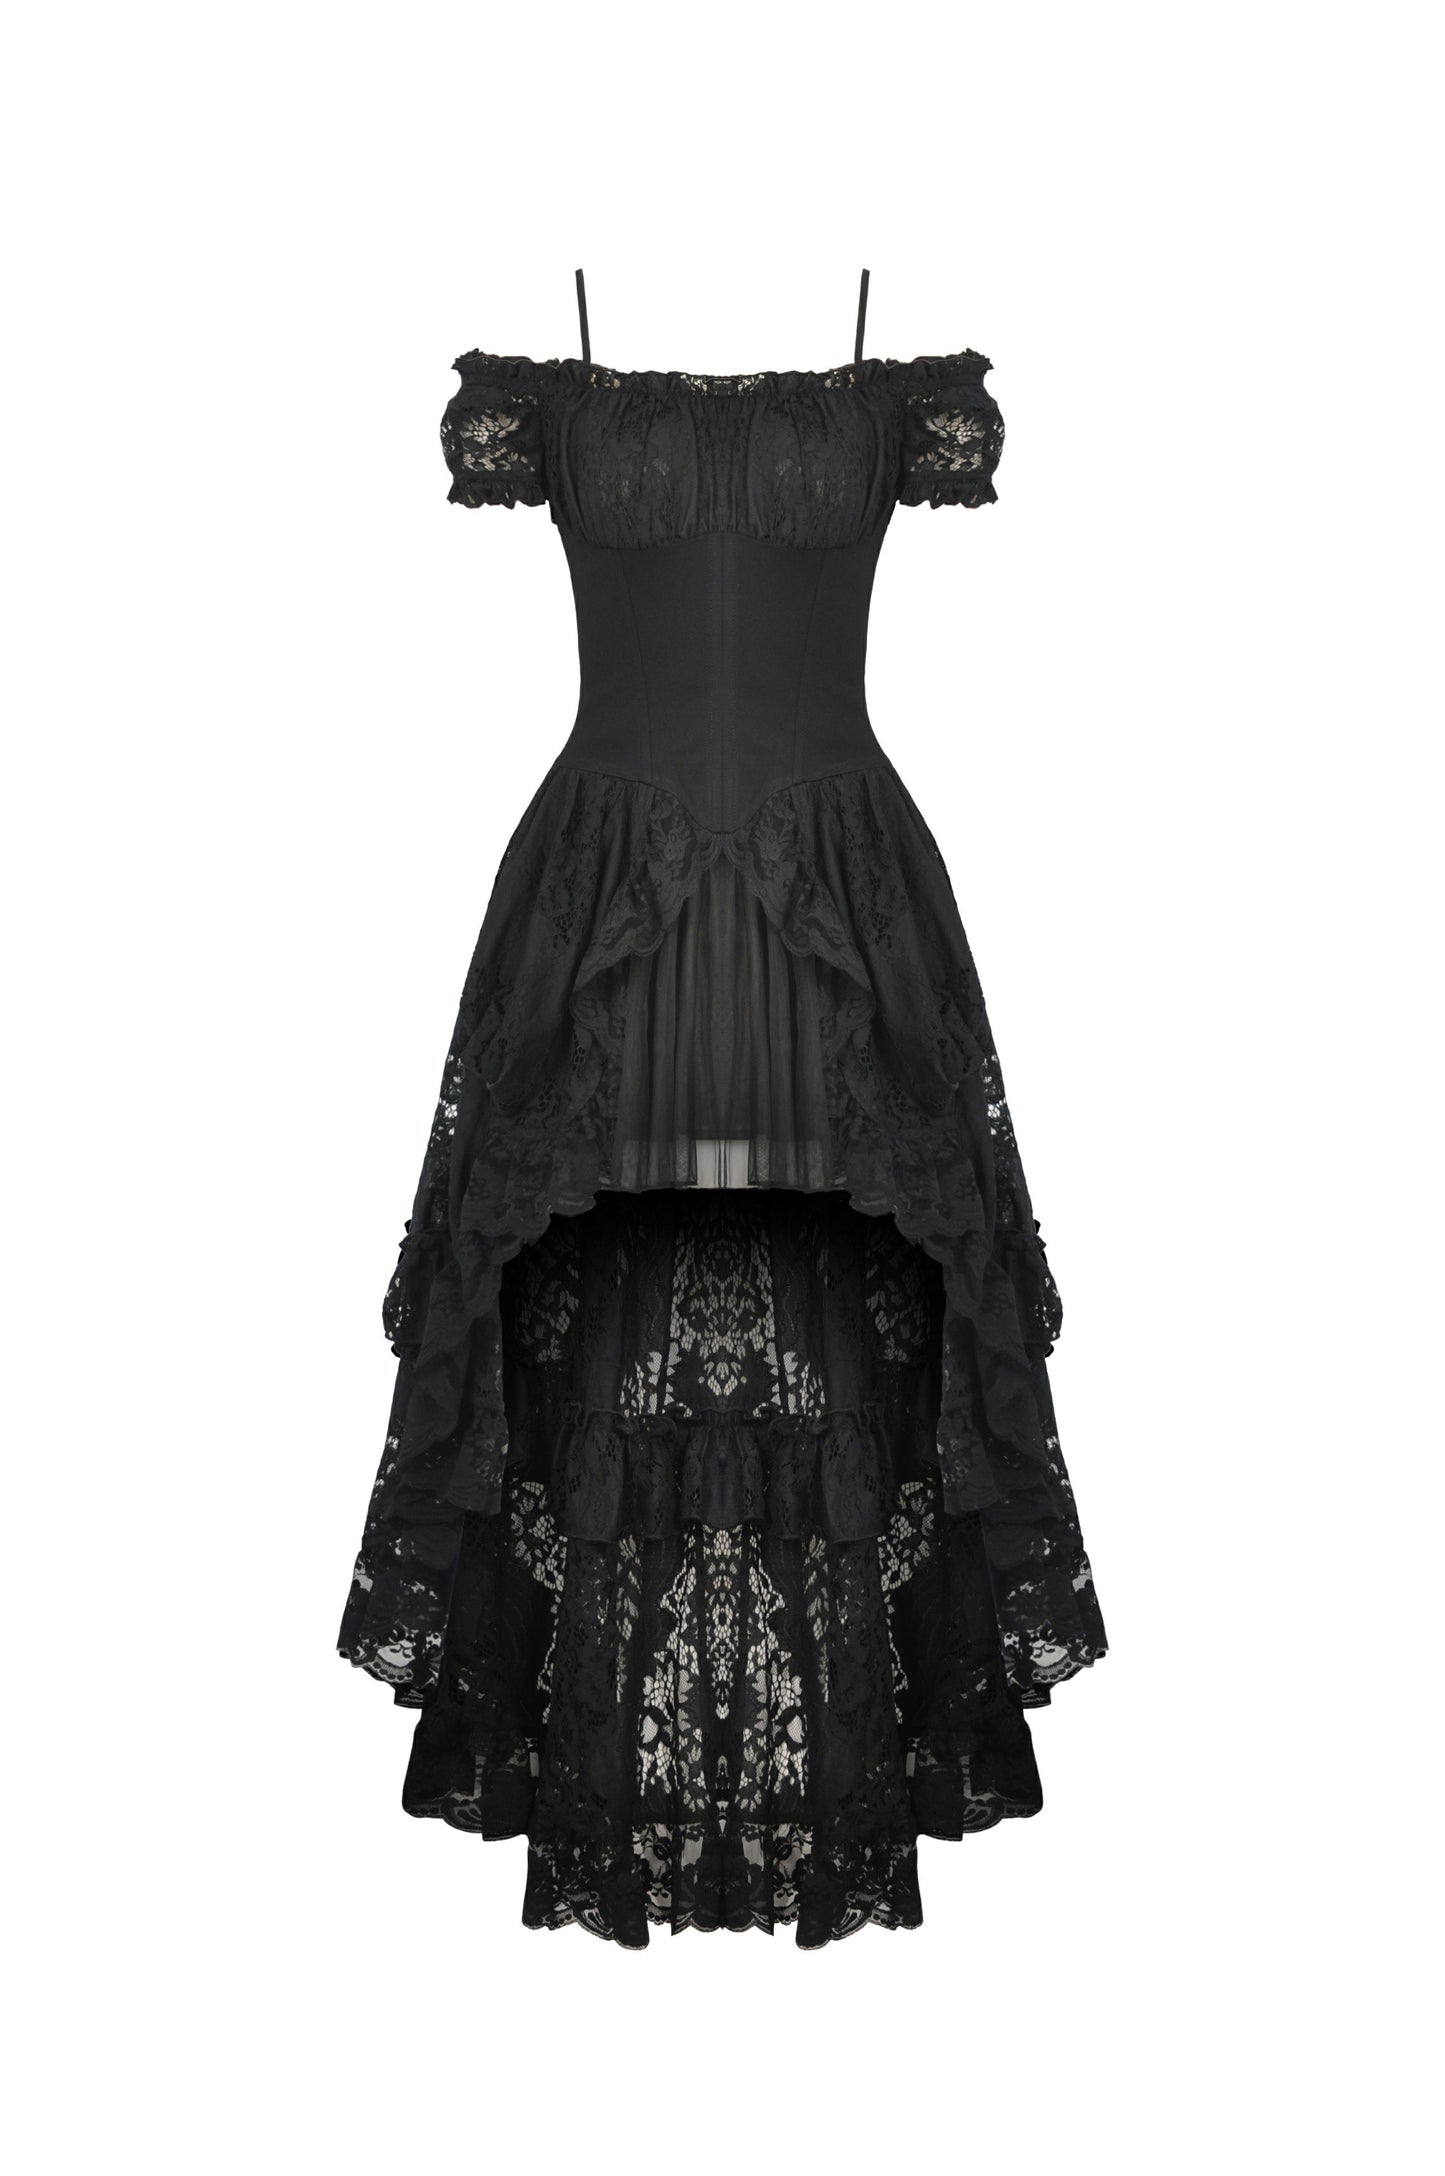 Bouquets & Poetry Gothic Lace Dress by Dark In Love